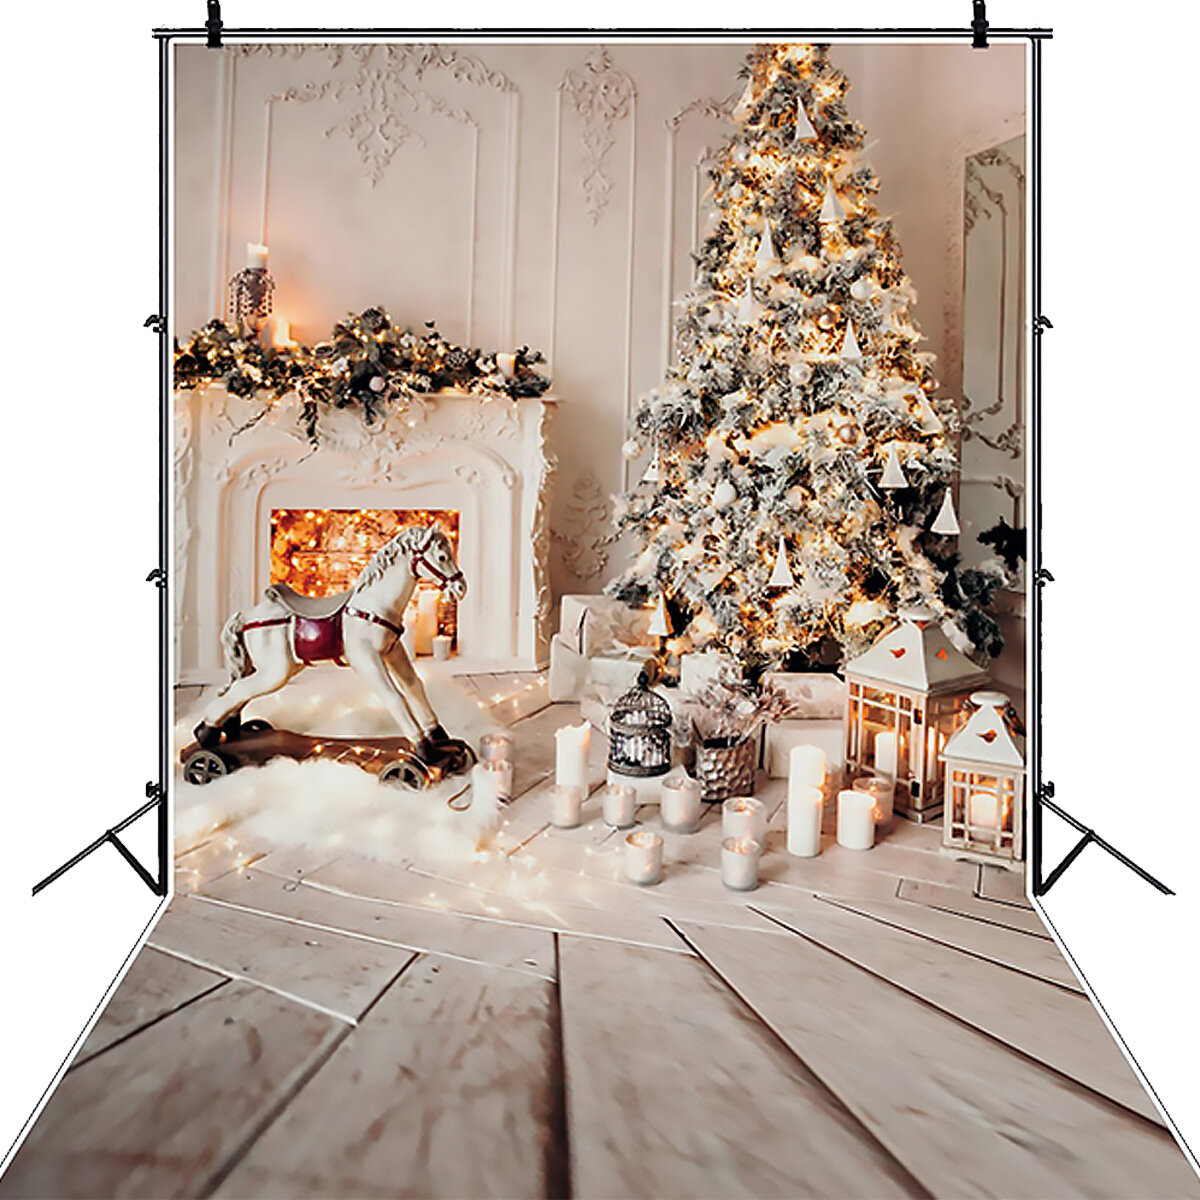 Gray Chic Wall Photo Background Fireplace Winter Christmas Tree Candle Gift Kid Toy Floor Party Photo Backdrop, Banggood  - buy with discount